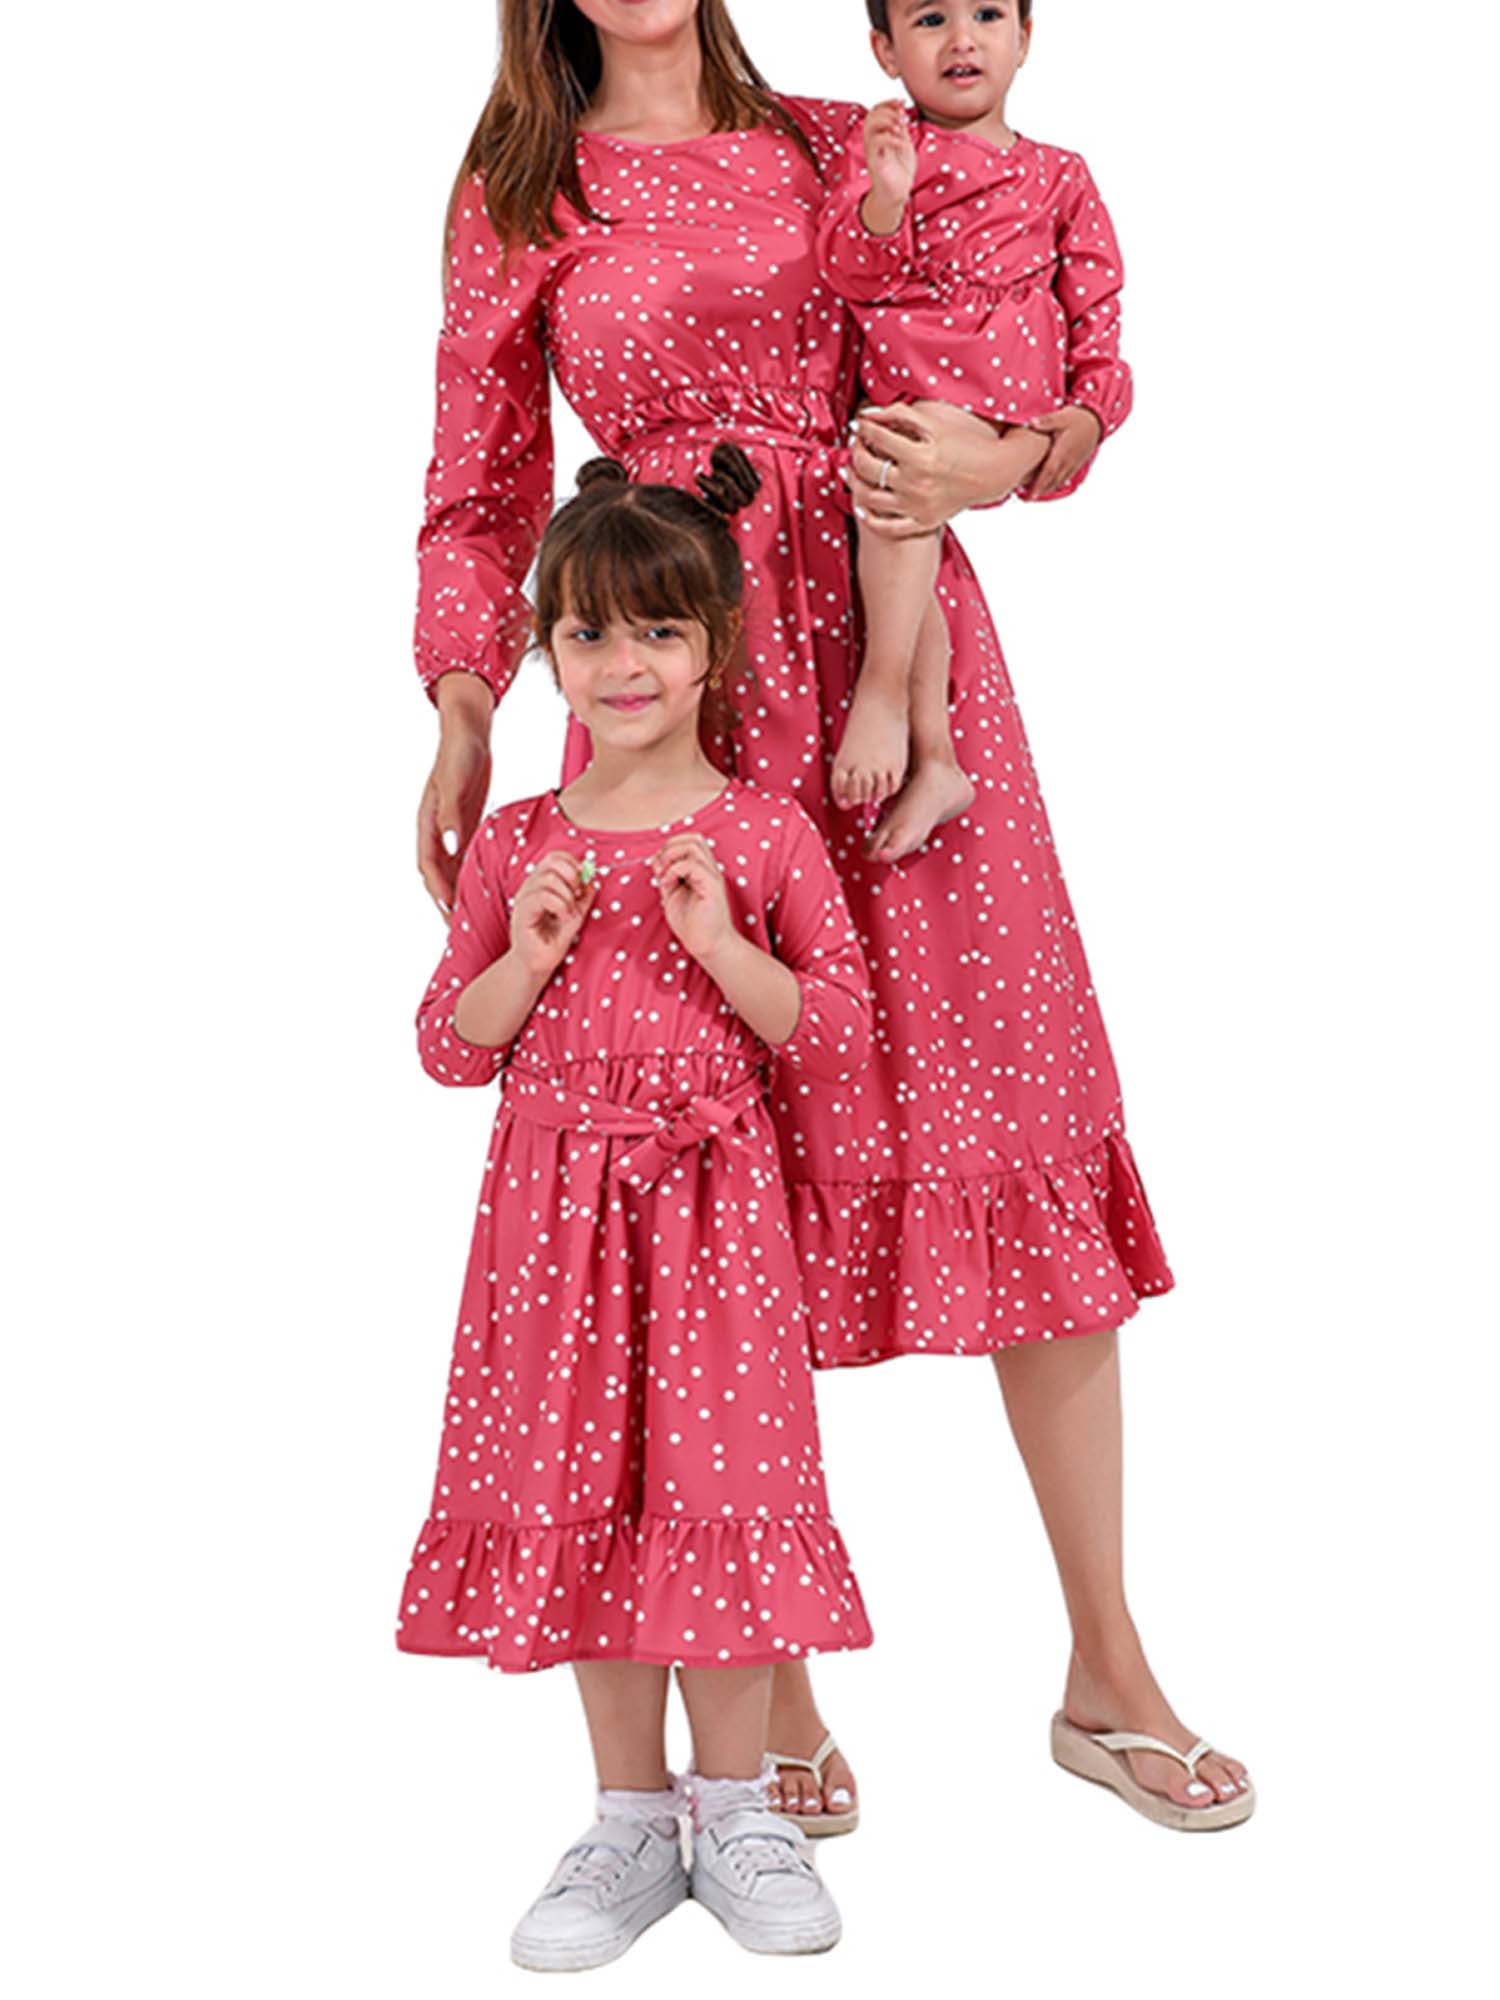 Mommy and Me Dress, Mother Daughter Matching Dress, Formal Photoshoot